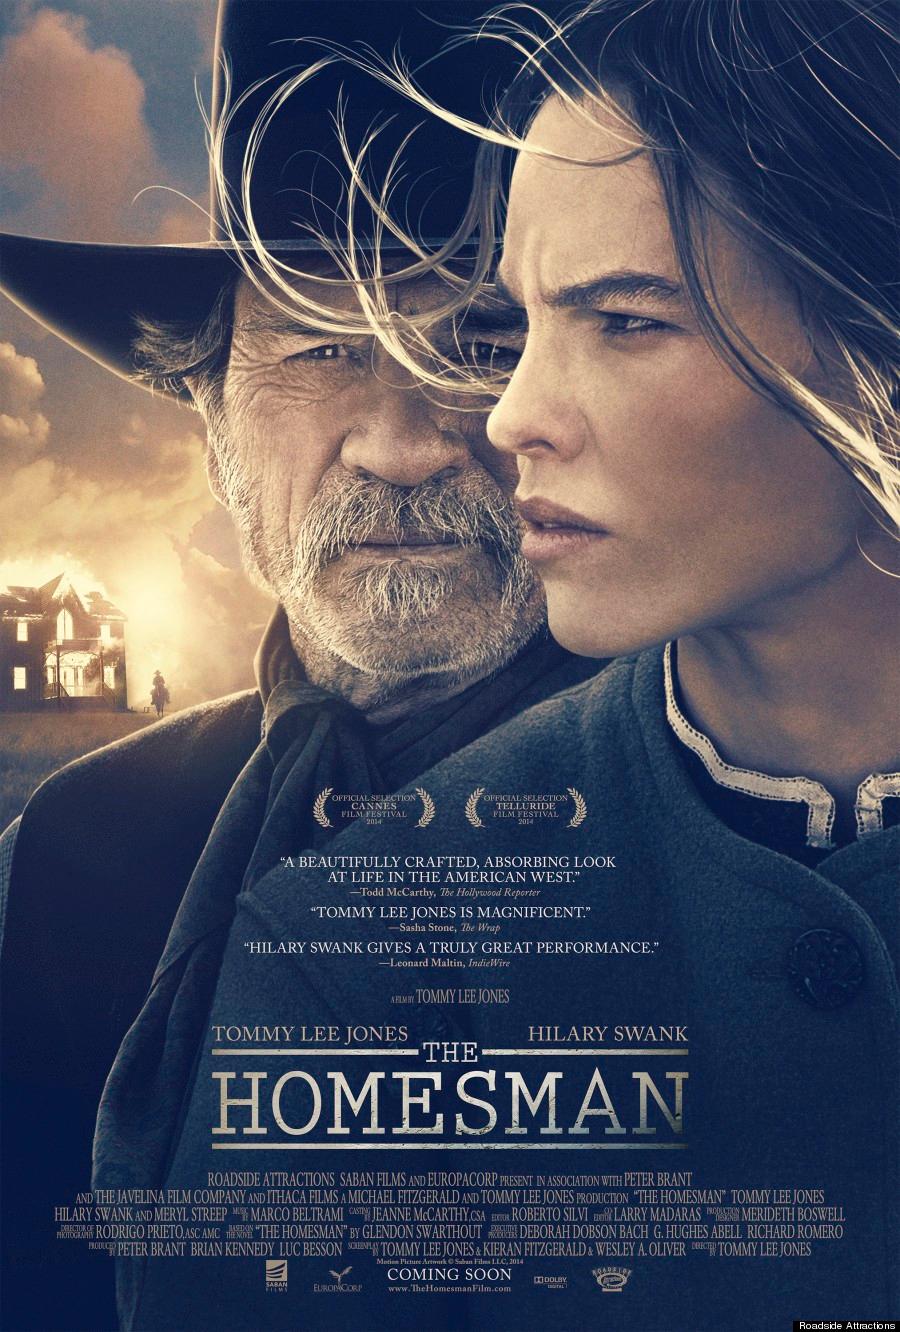 Movie poster for "The Homesman."